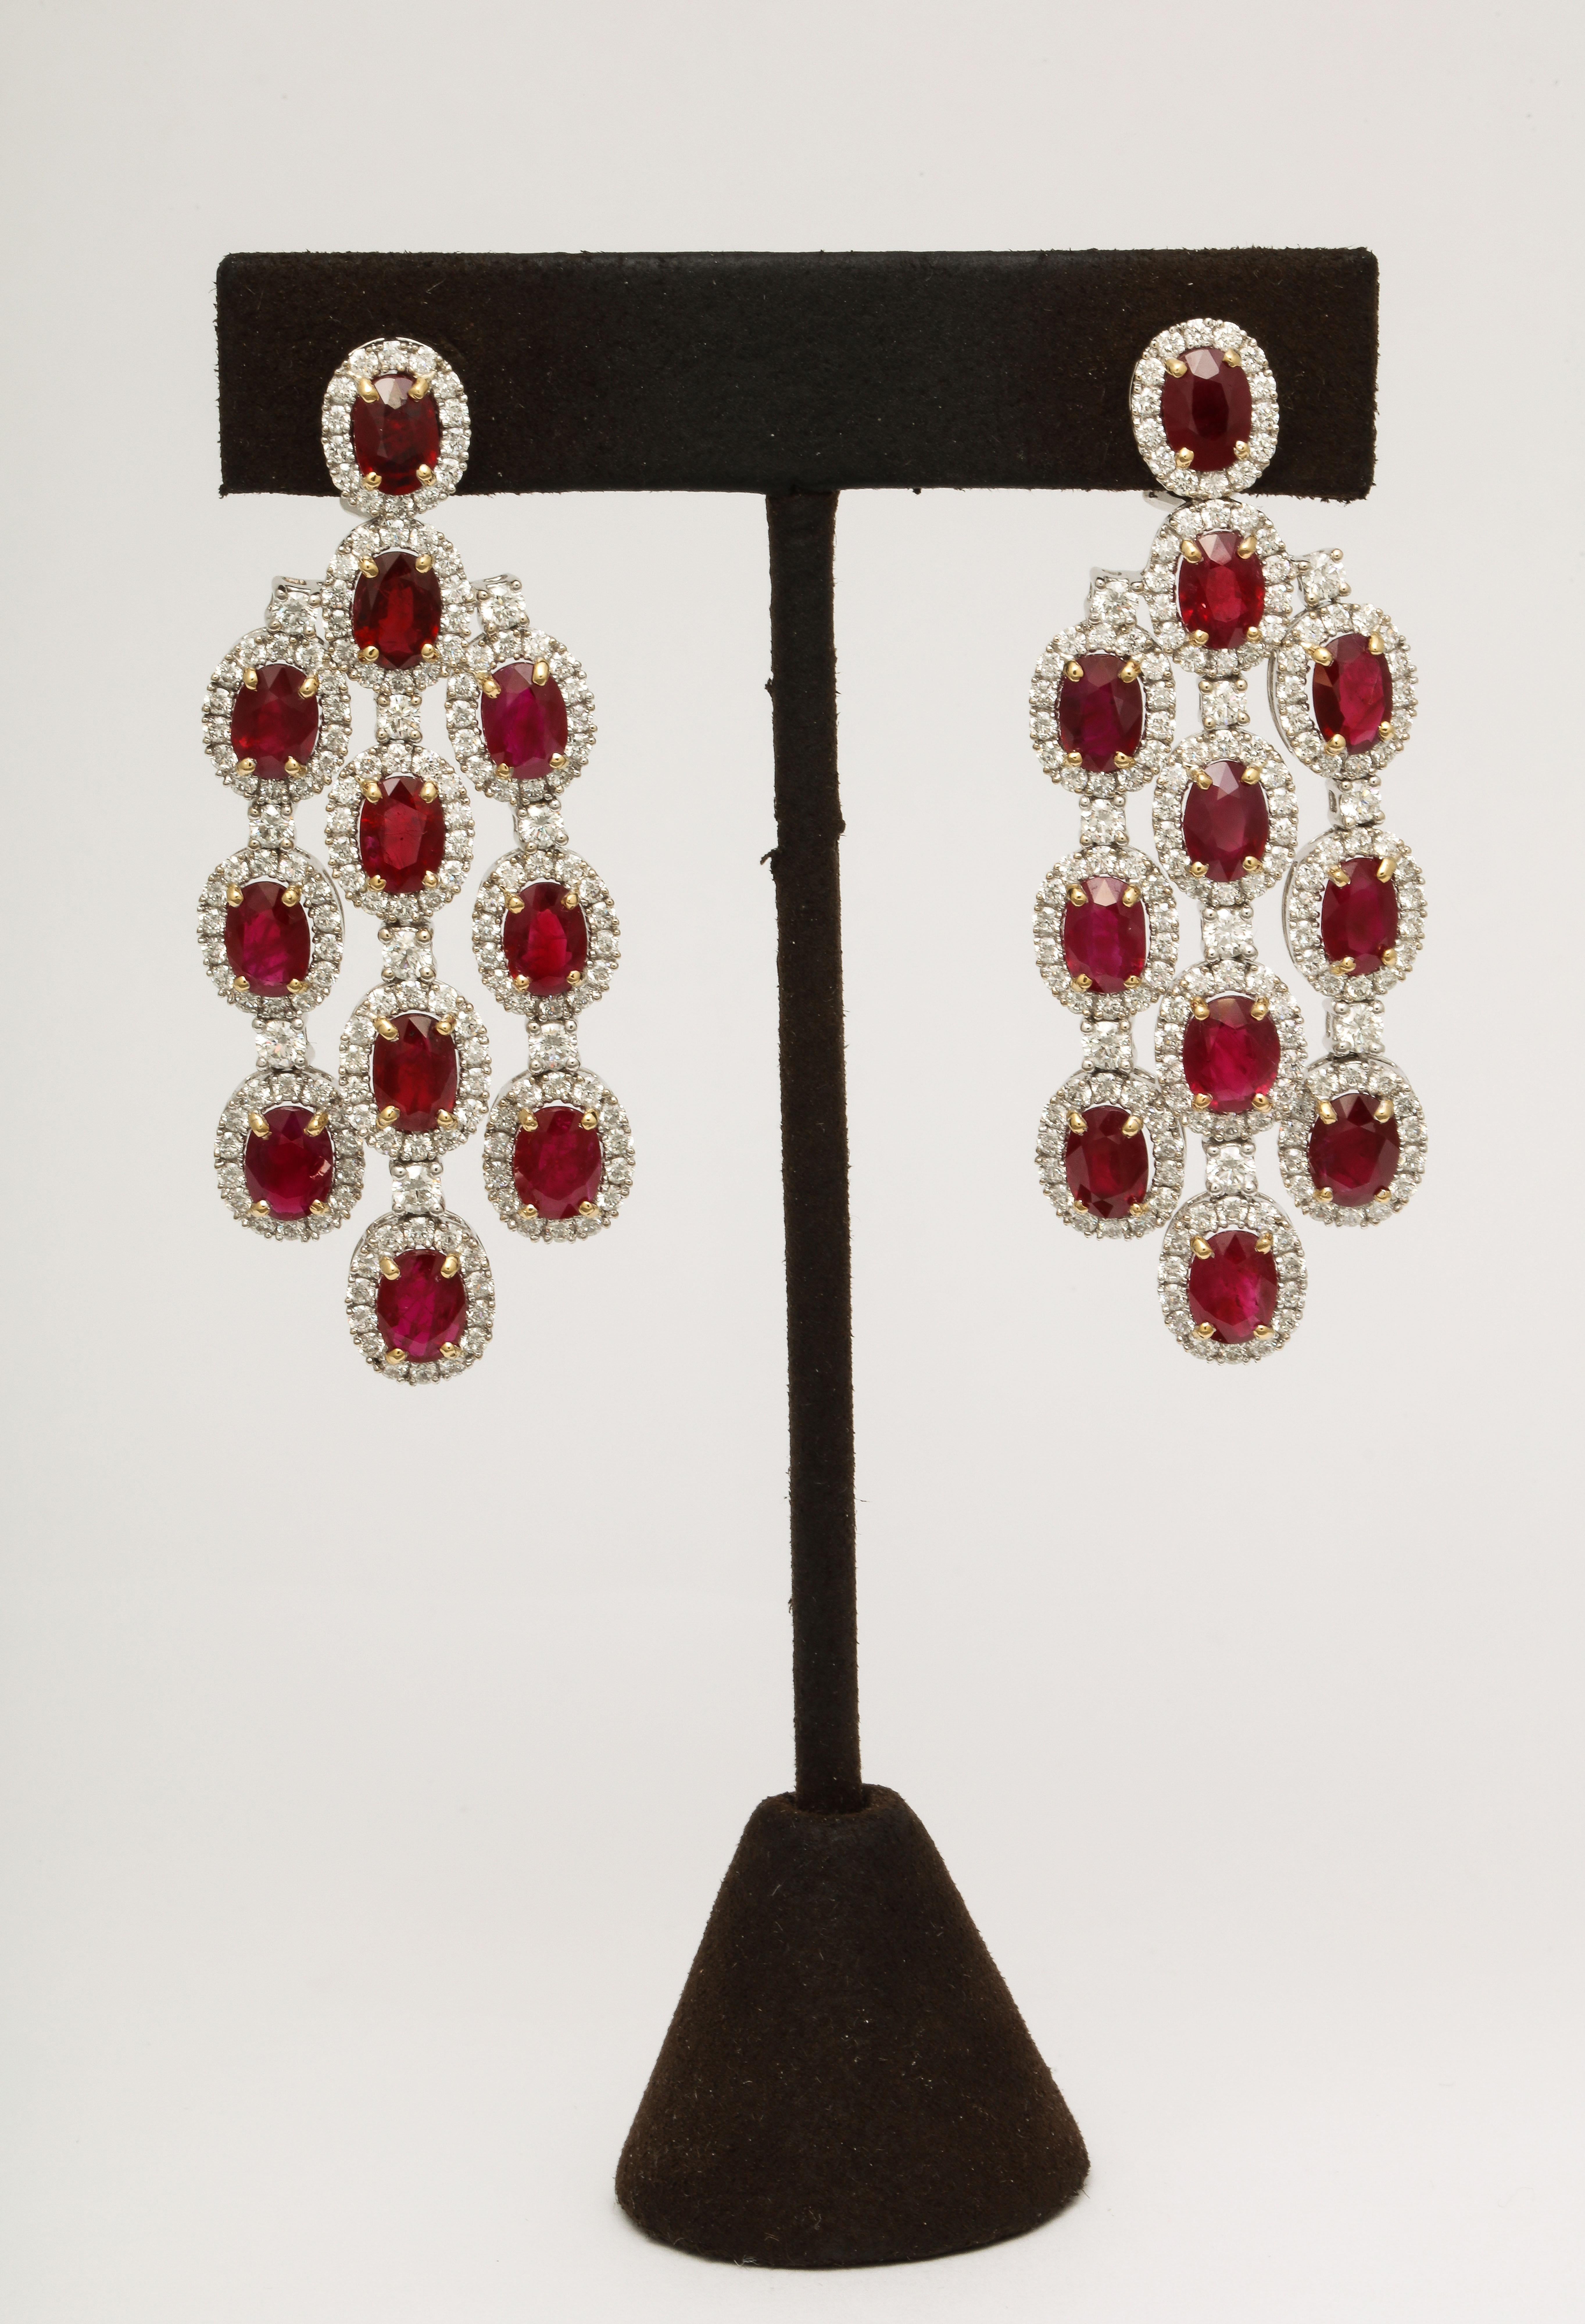 
21.04 carats of Fine Oval Ruby.

6.52 carats of White Round Brilliant cut Diamonds. 

Approximately 2.40 inch length. 

Set in 18k white and yellow gold 
